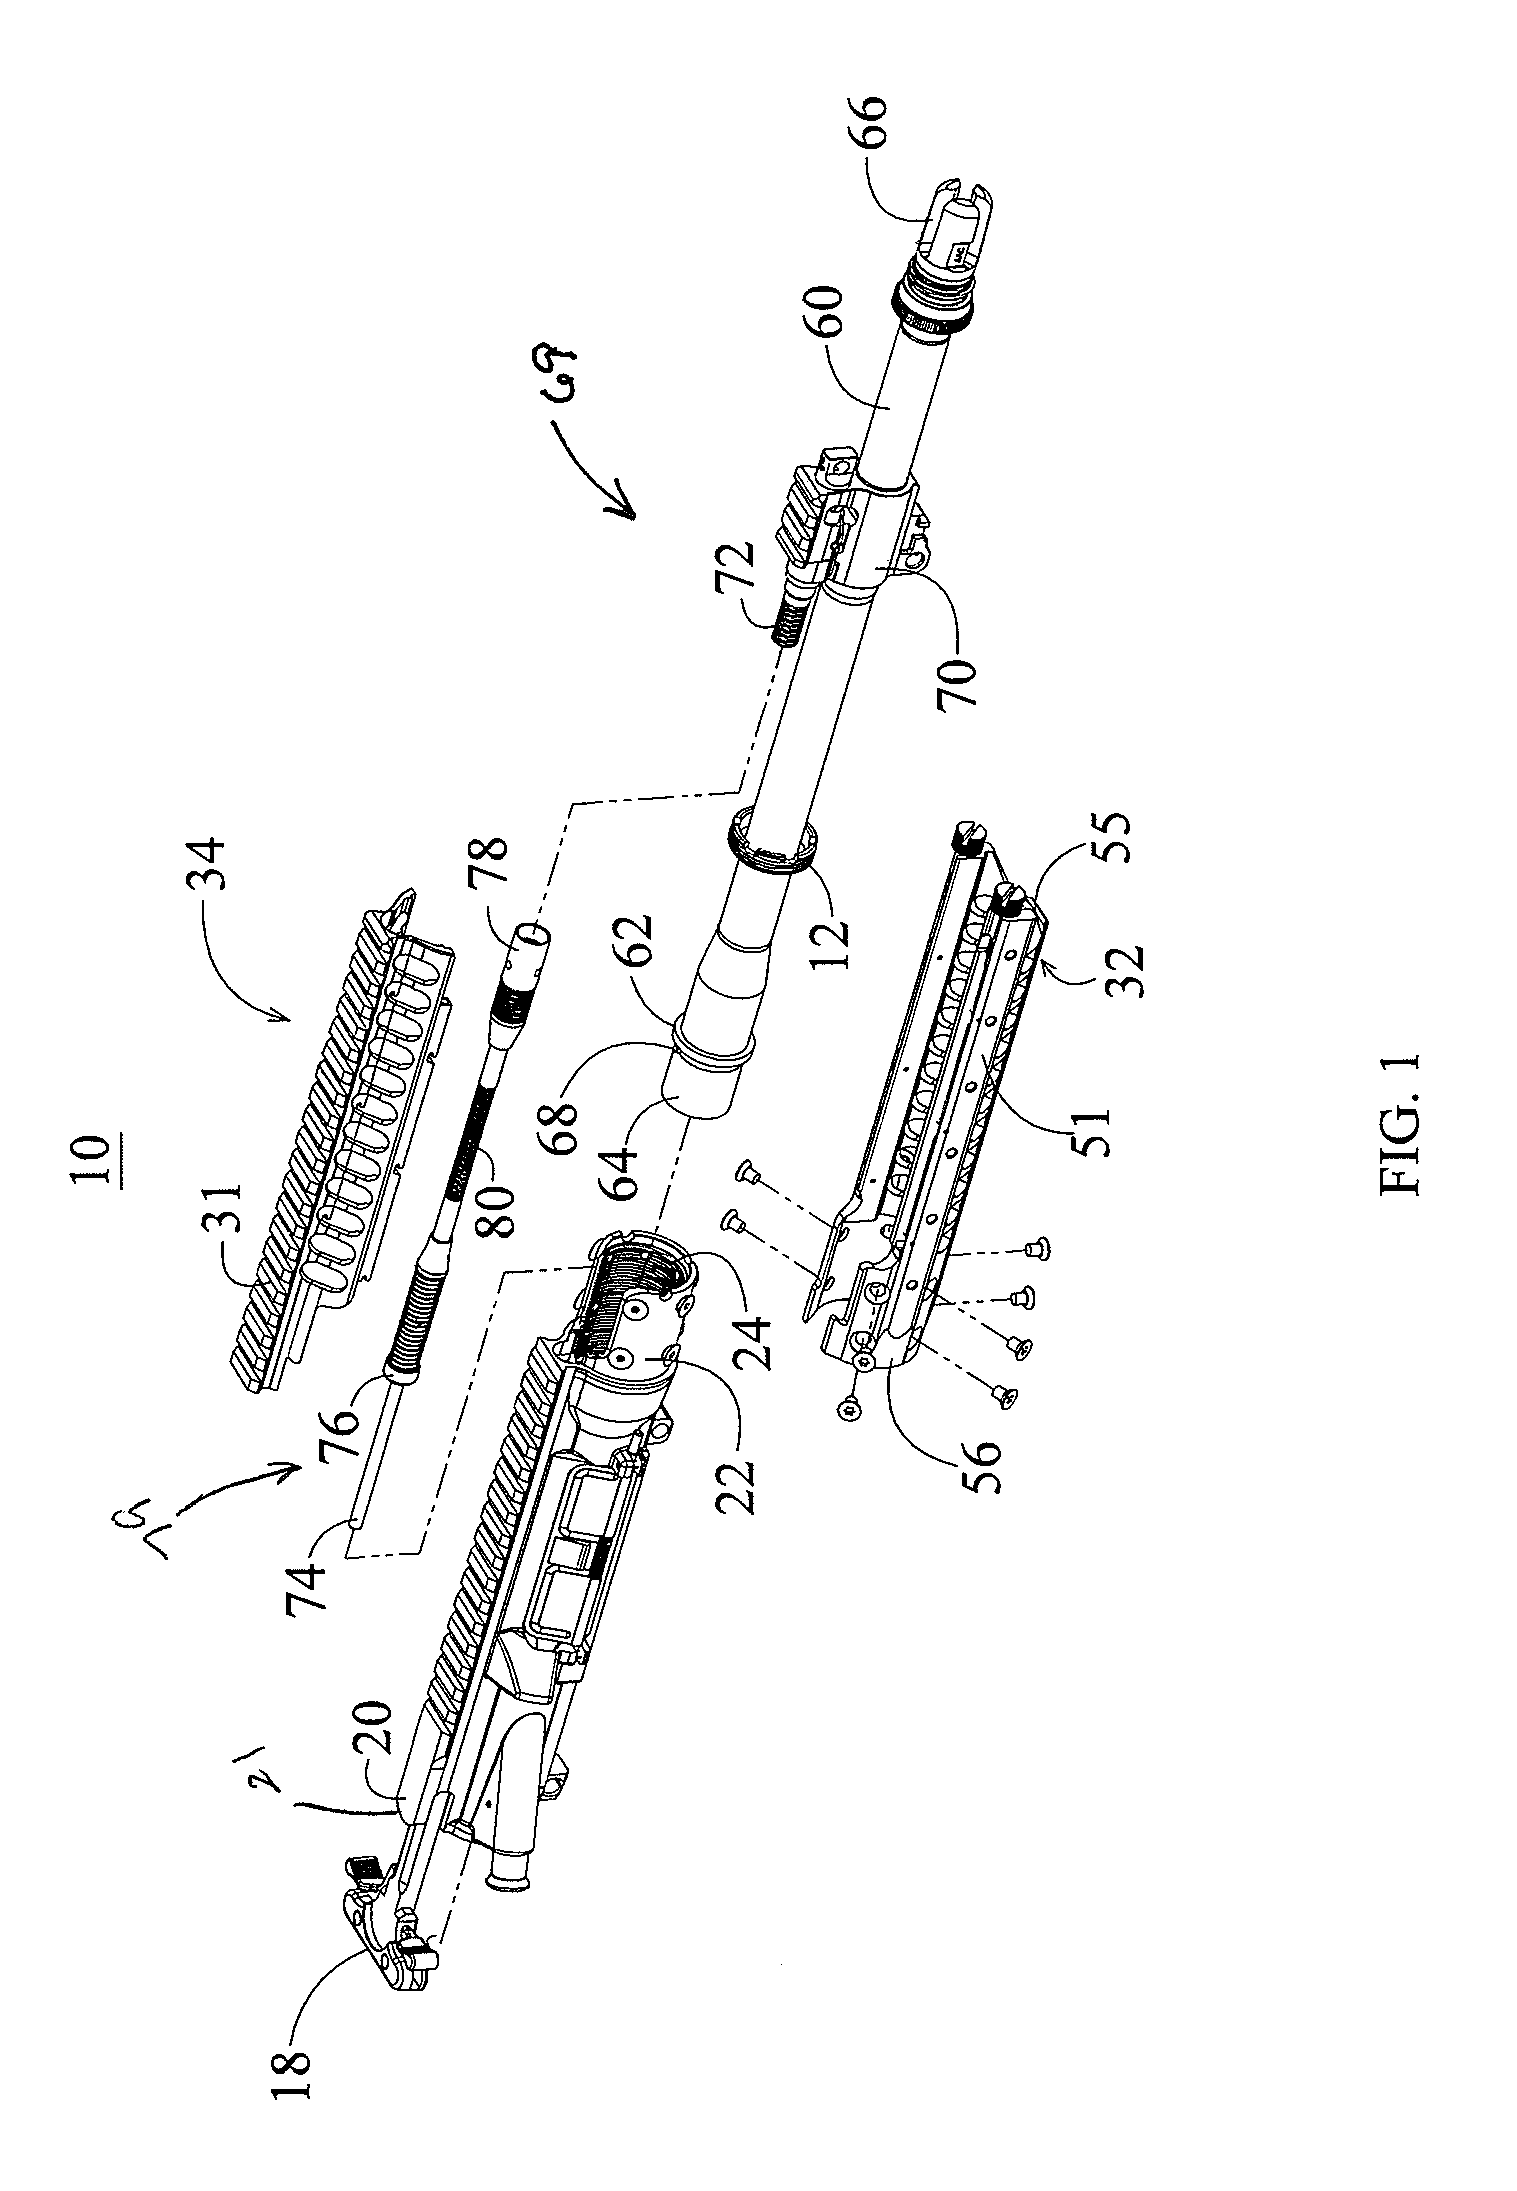 Firearm receiver assembly